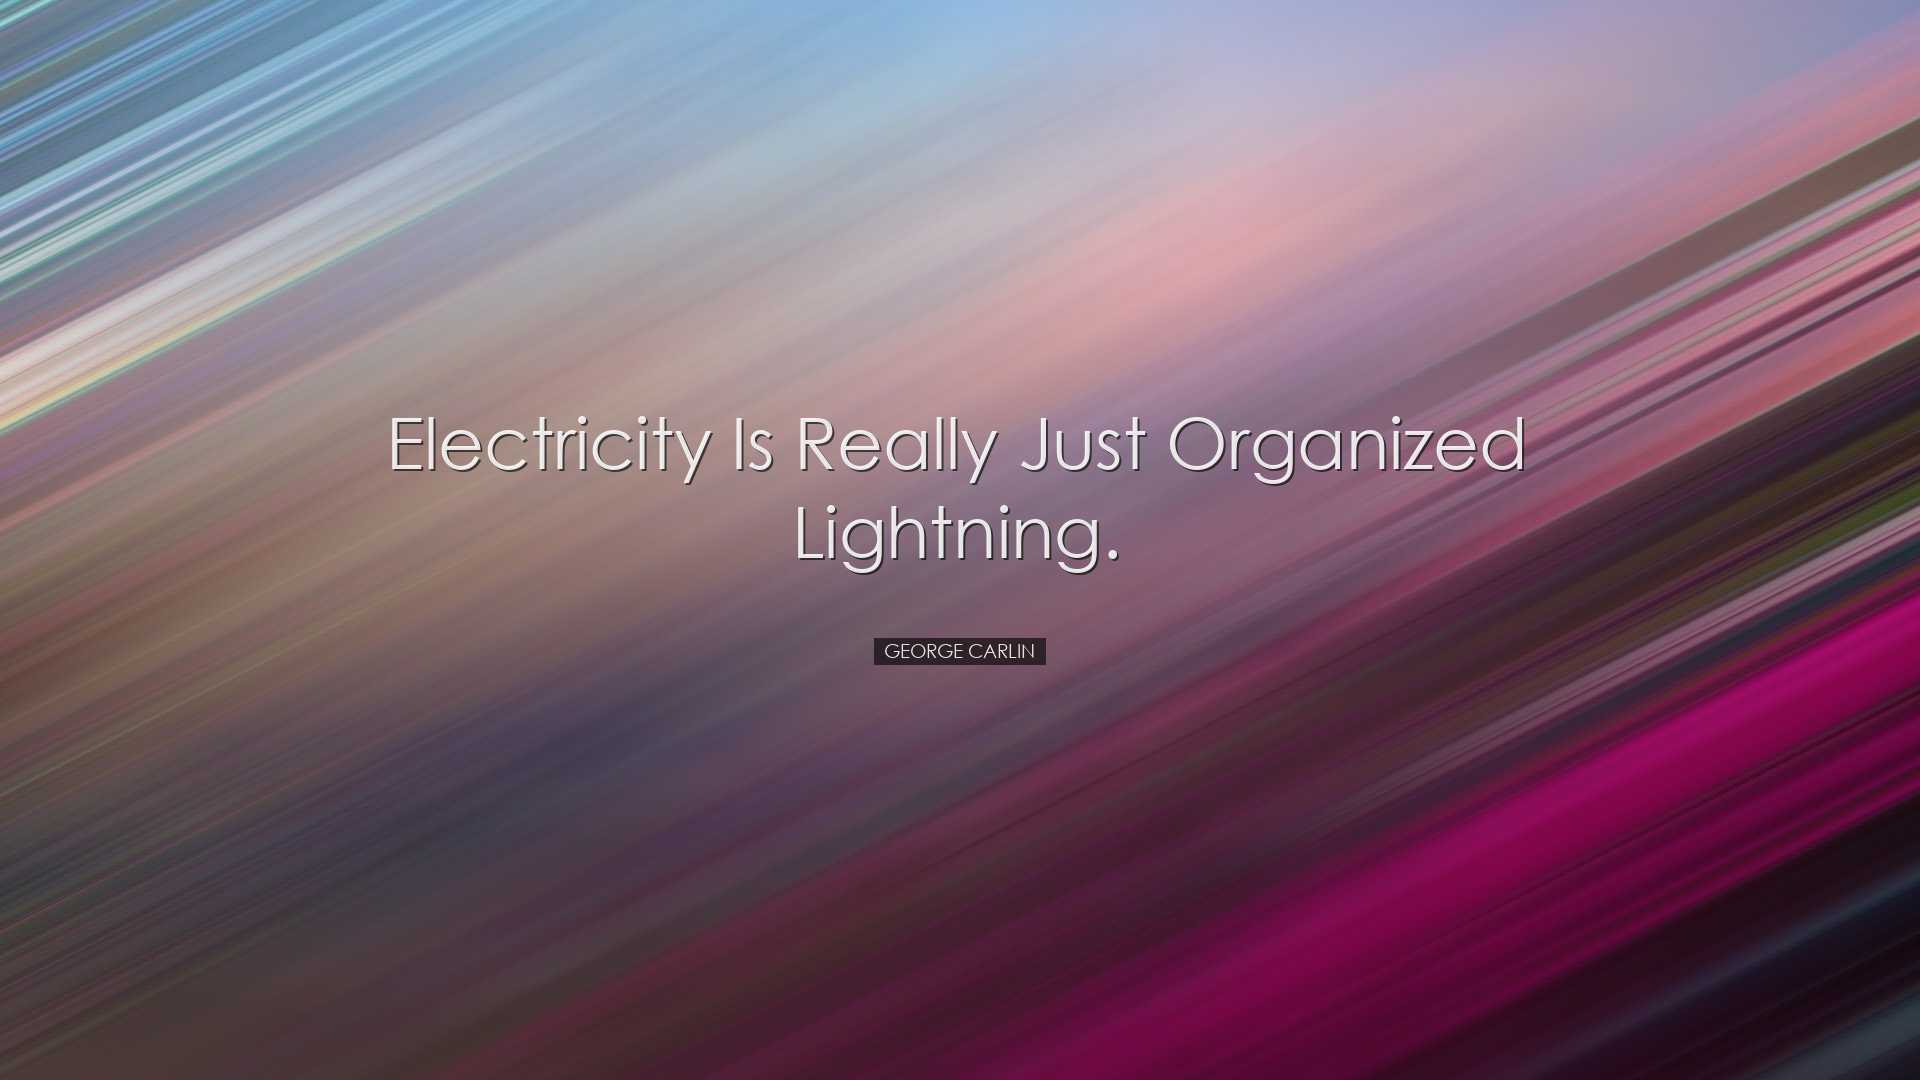 Electricity is really just organized lightning. - George Carlin